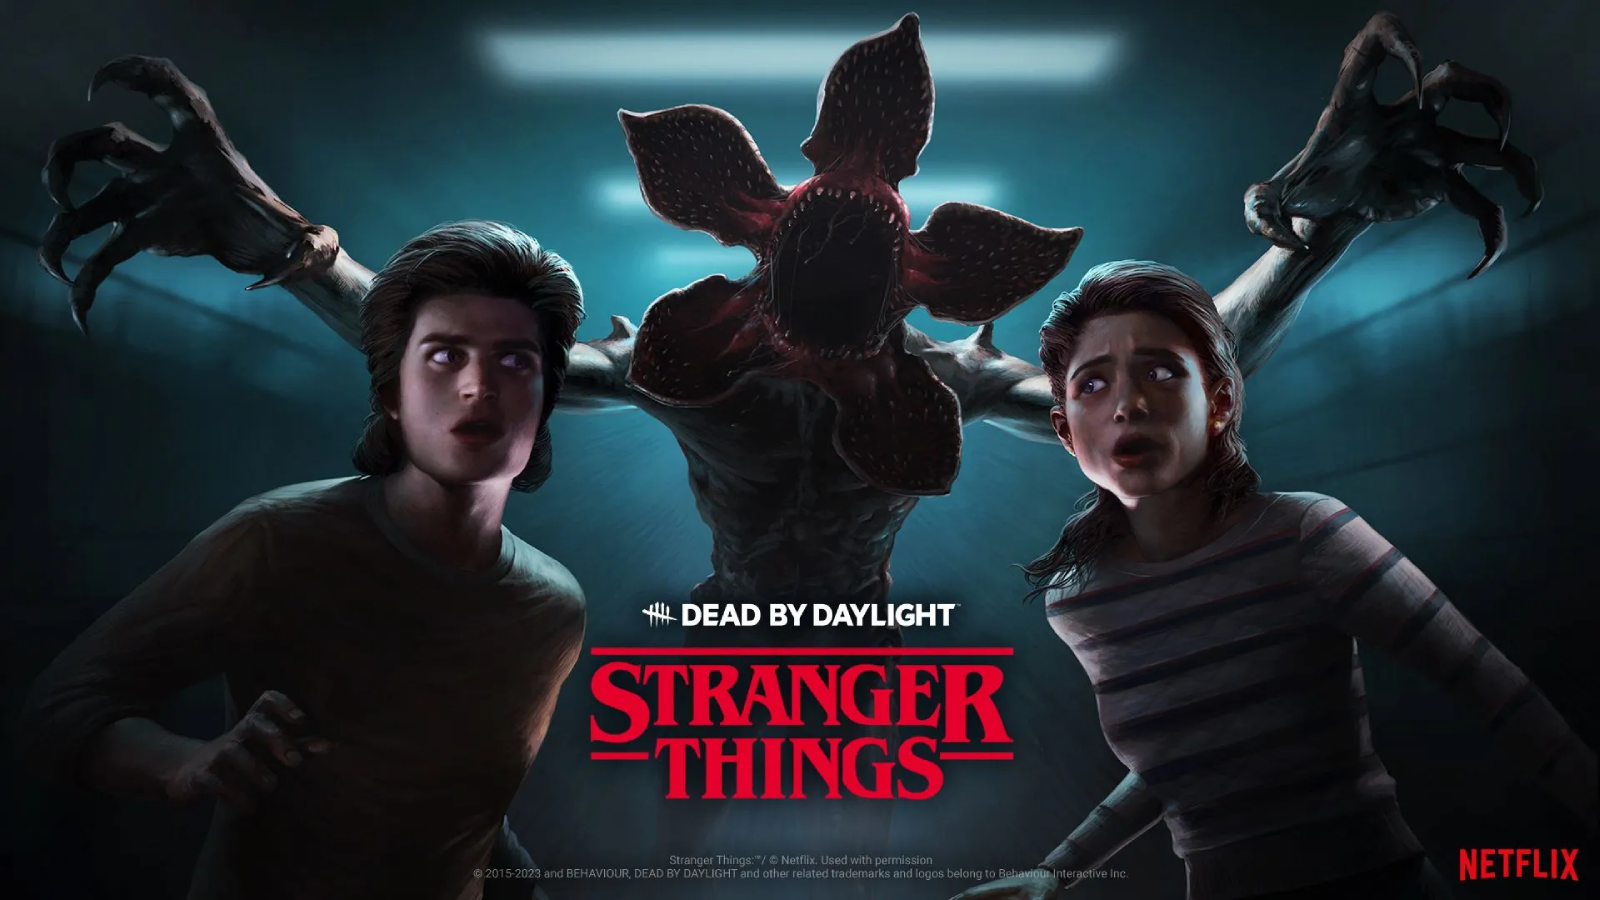 Stranger Things: The Game - Experience It on PC Today